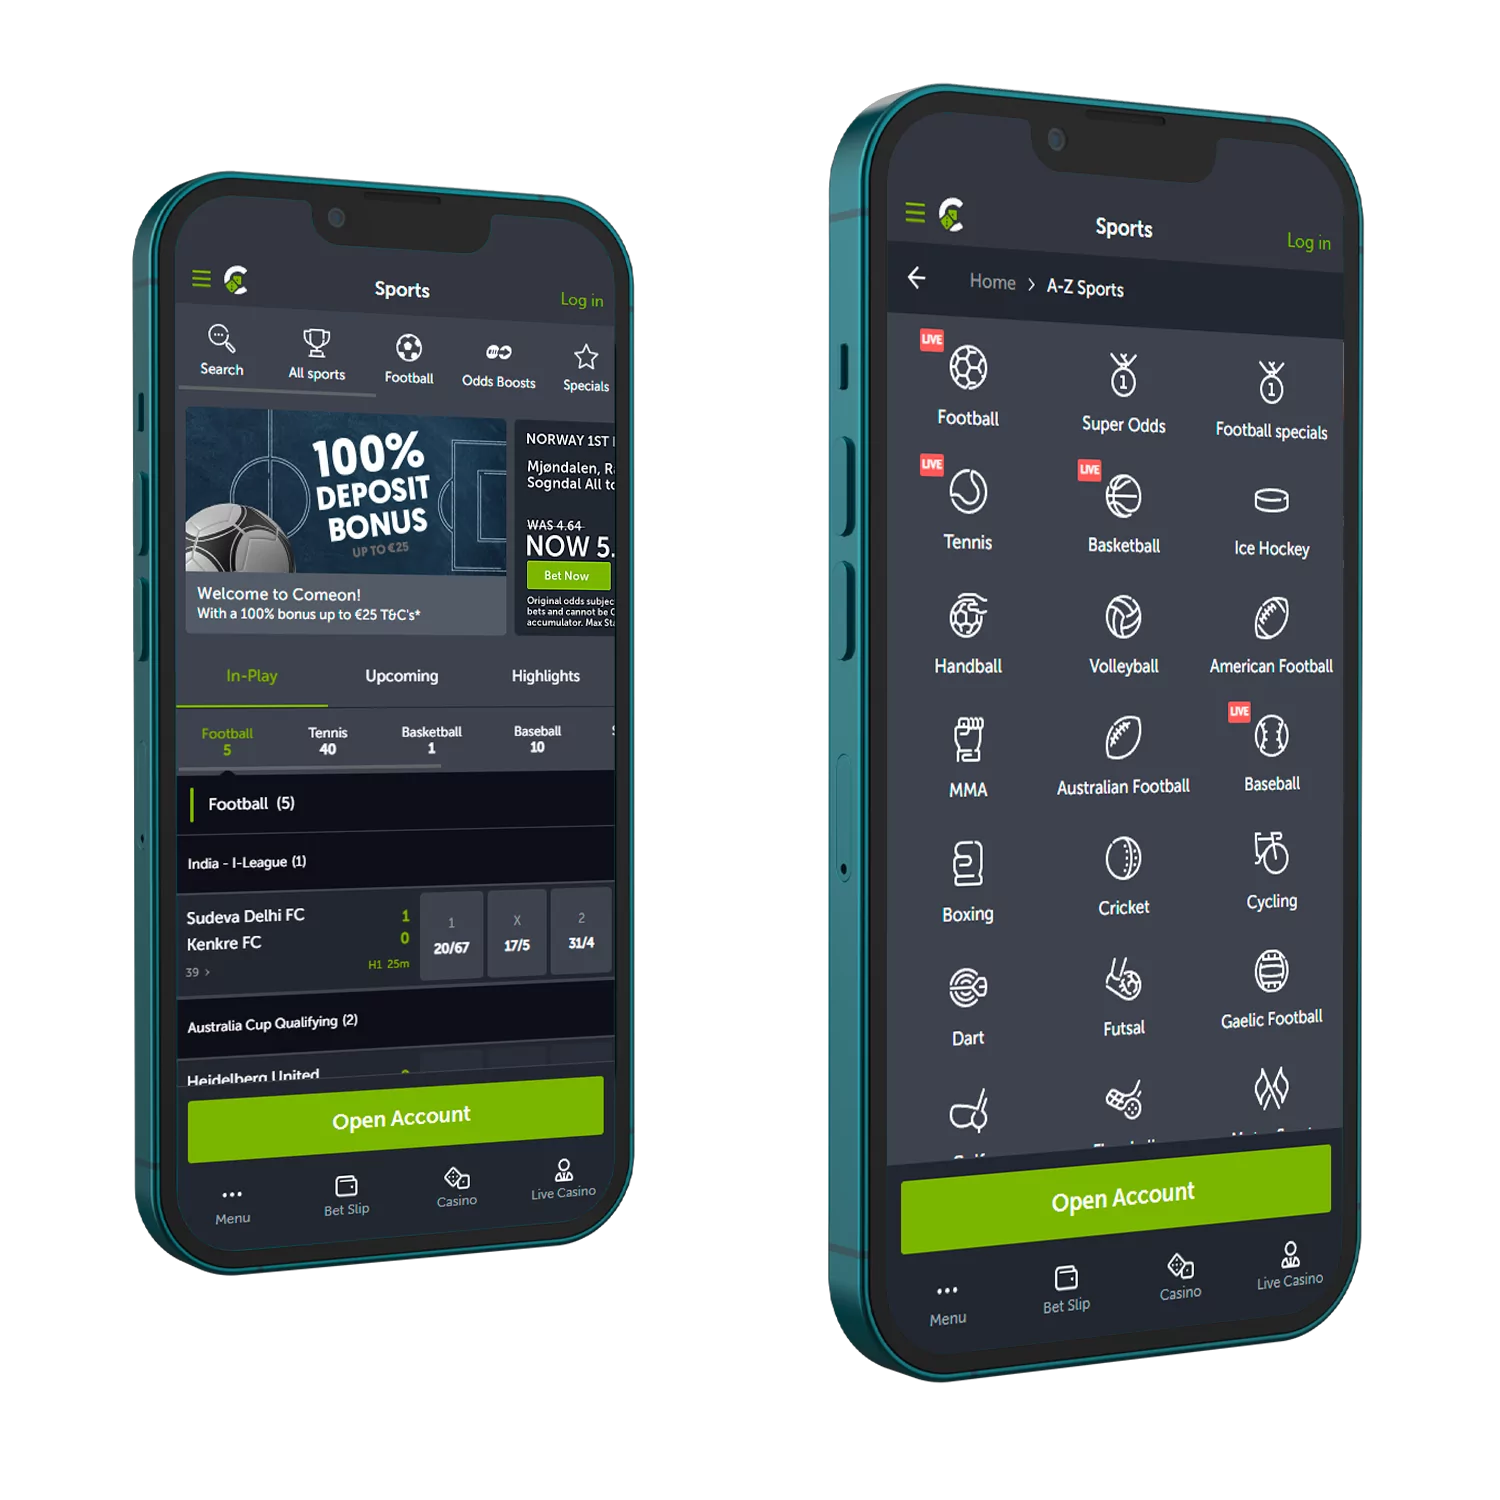 The Comeon mobile app is available as a free download for Android and iOS.